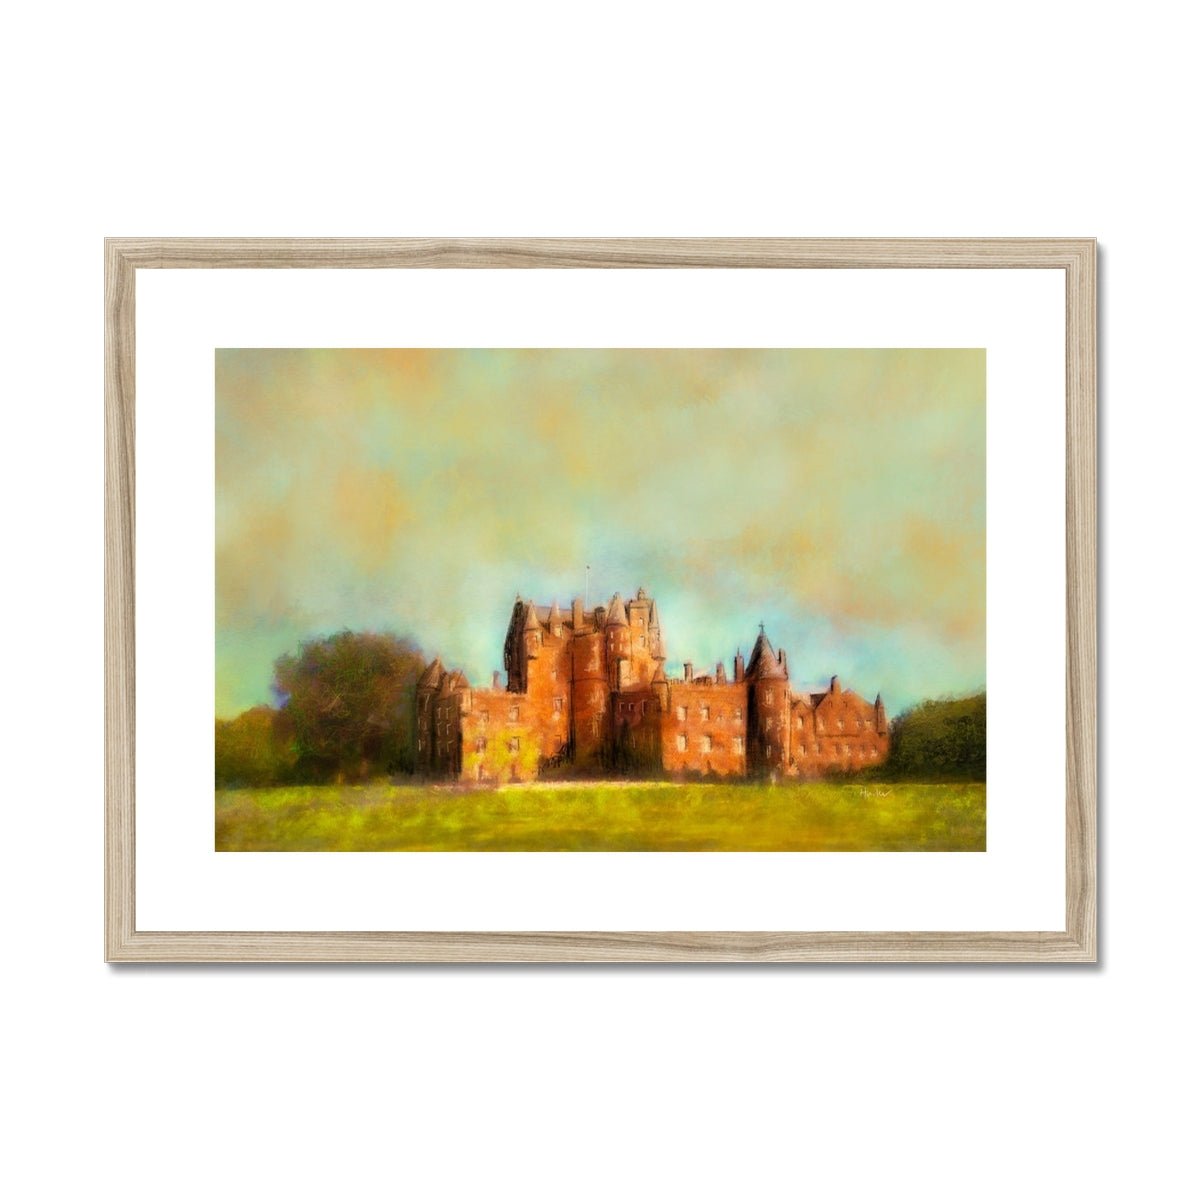 Glamis Castle Painting | Framed & Mounted Prints From Scotland-Framed & Mounted Prints-Scottish Castles Art Gallery-A2 Landscape-Natural Frame-Paintings, Prints, Homeware, Art Gifts From Scotland By Scottish Artist Kevin Hunter